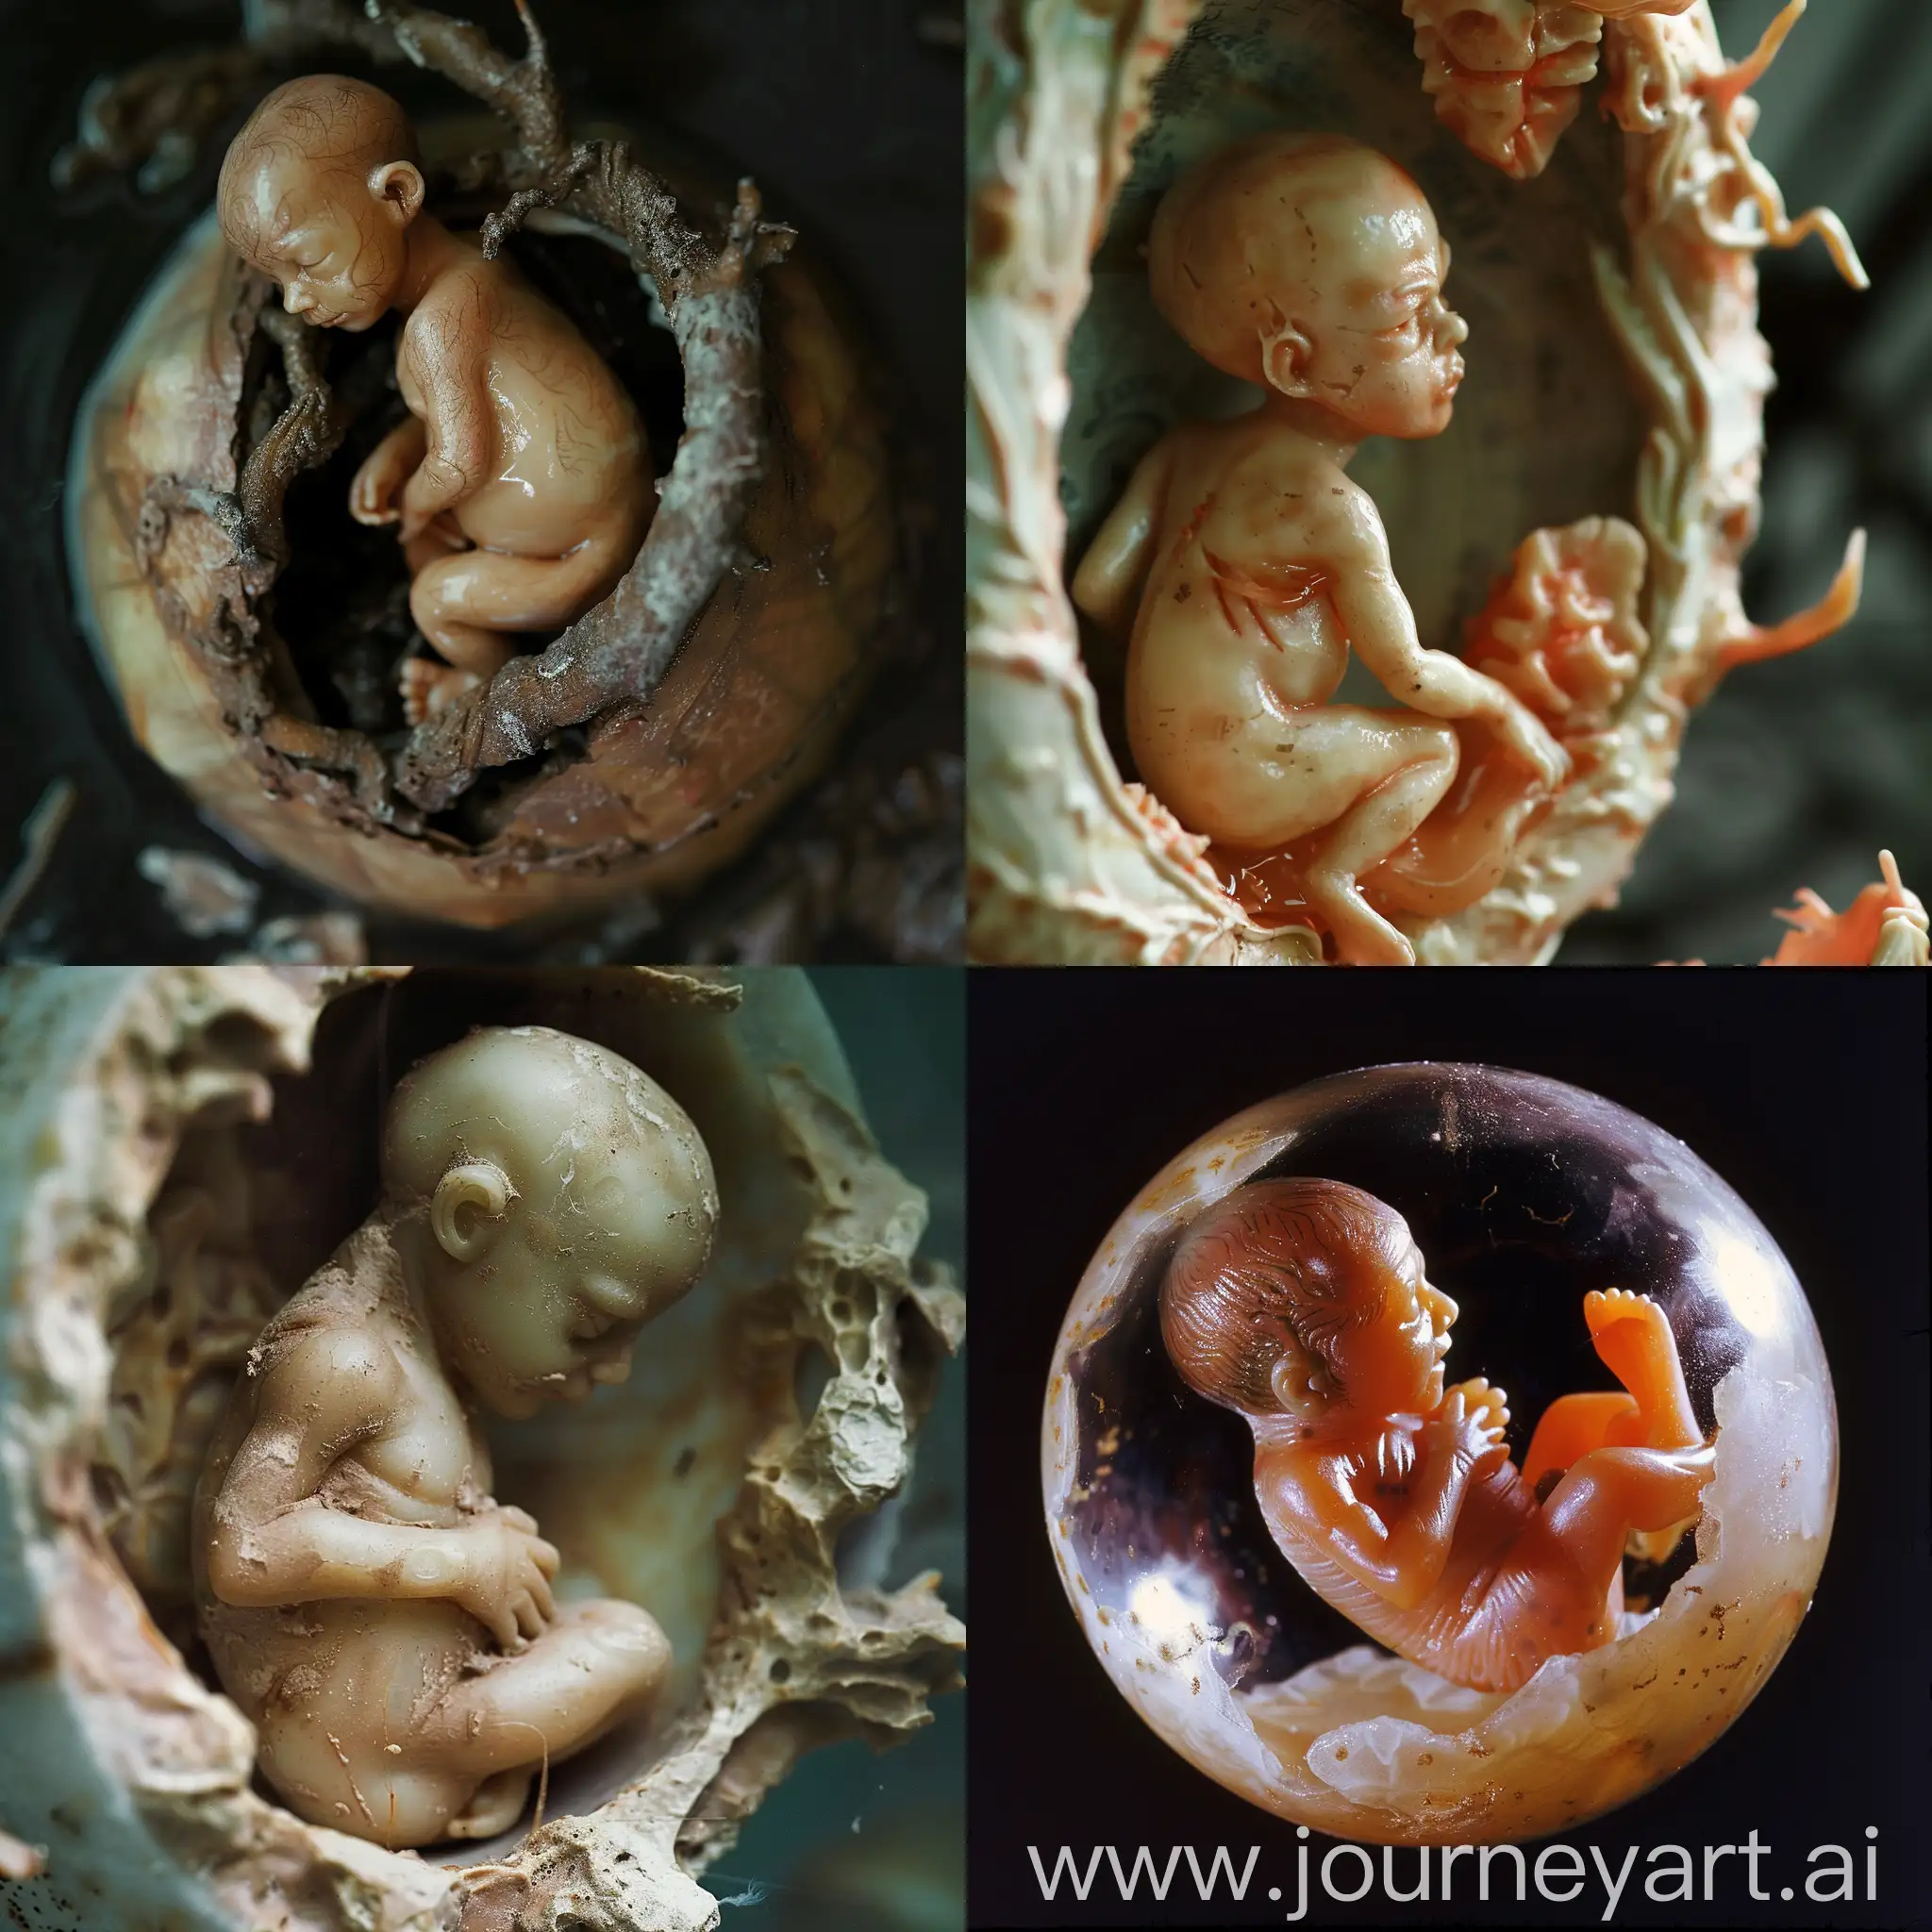 Development-of-Fetus-in-the-Womb-A-Visual-Journey